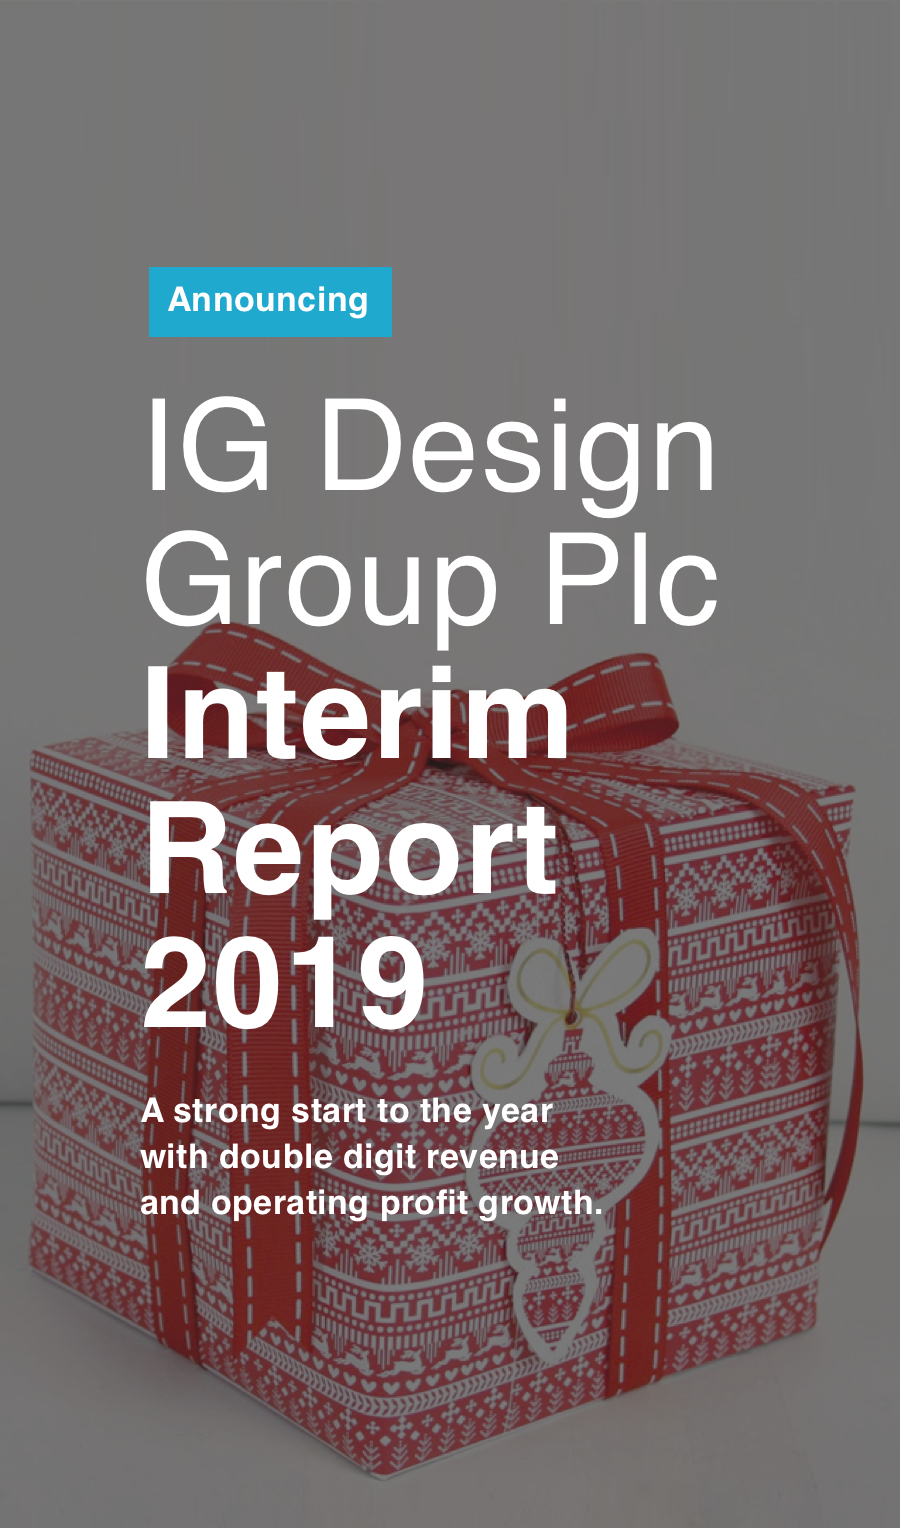 Announcing: IG Design Group PLC Interim Report 2019. A strong start to the year with double digit revenue and operating profit growth.